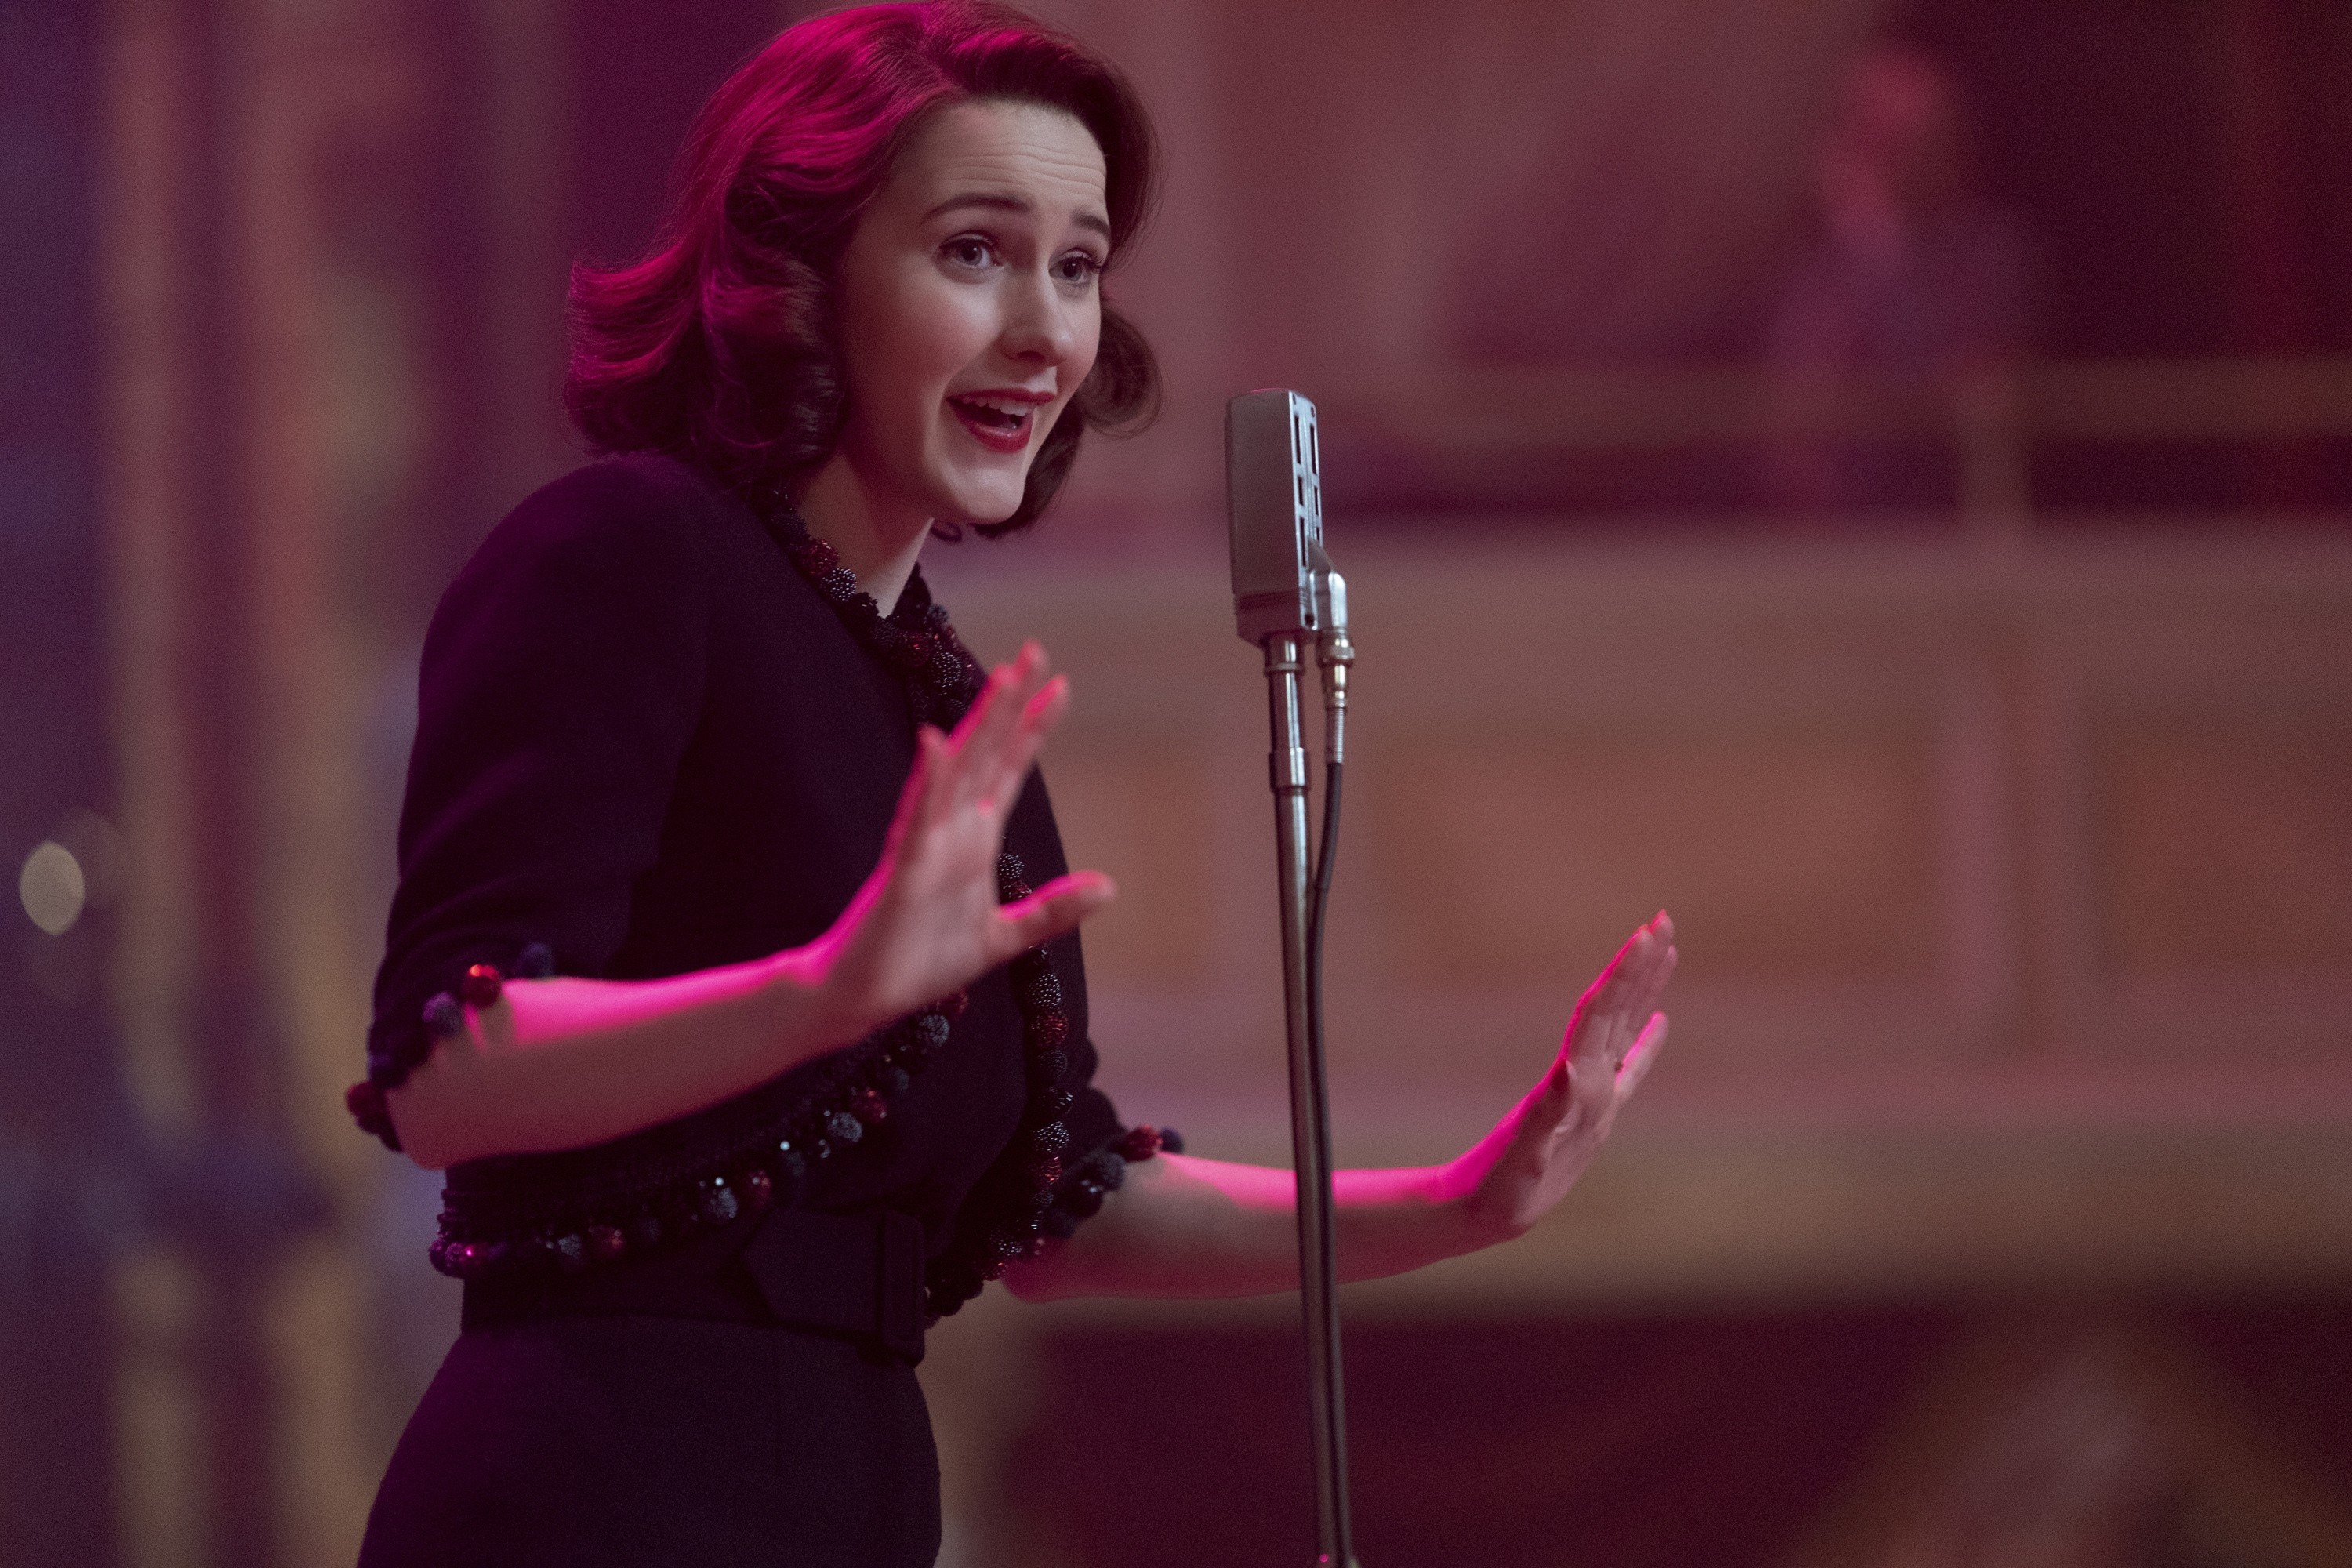 mrs. maisel performing on stage